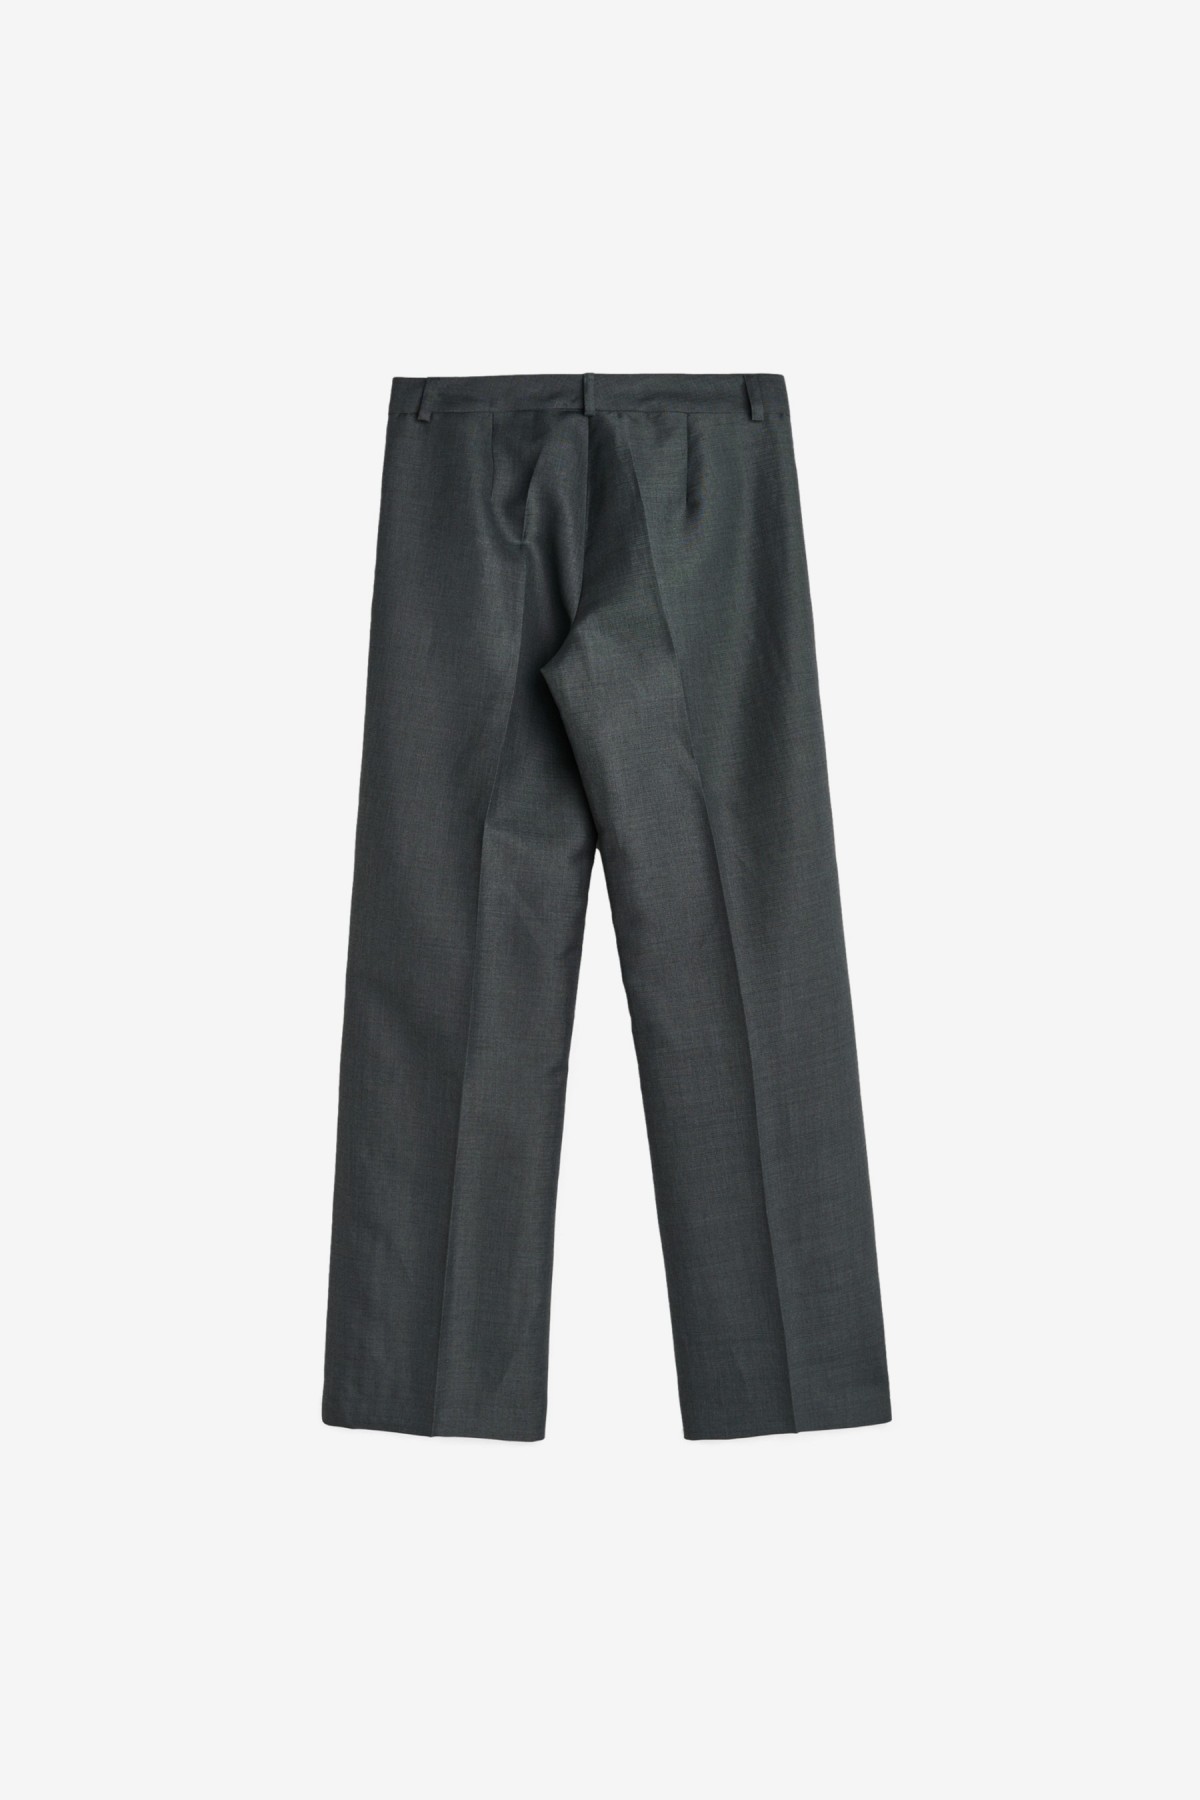 Our Legacy Hip Trouser in 